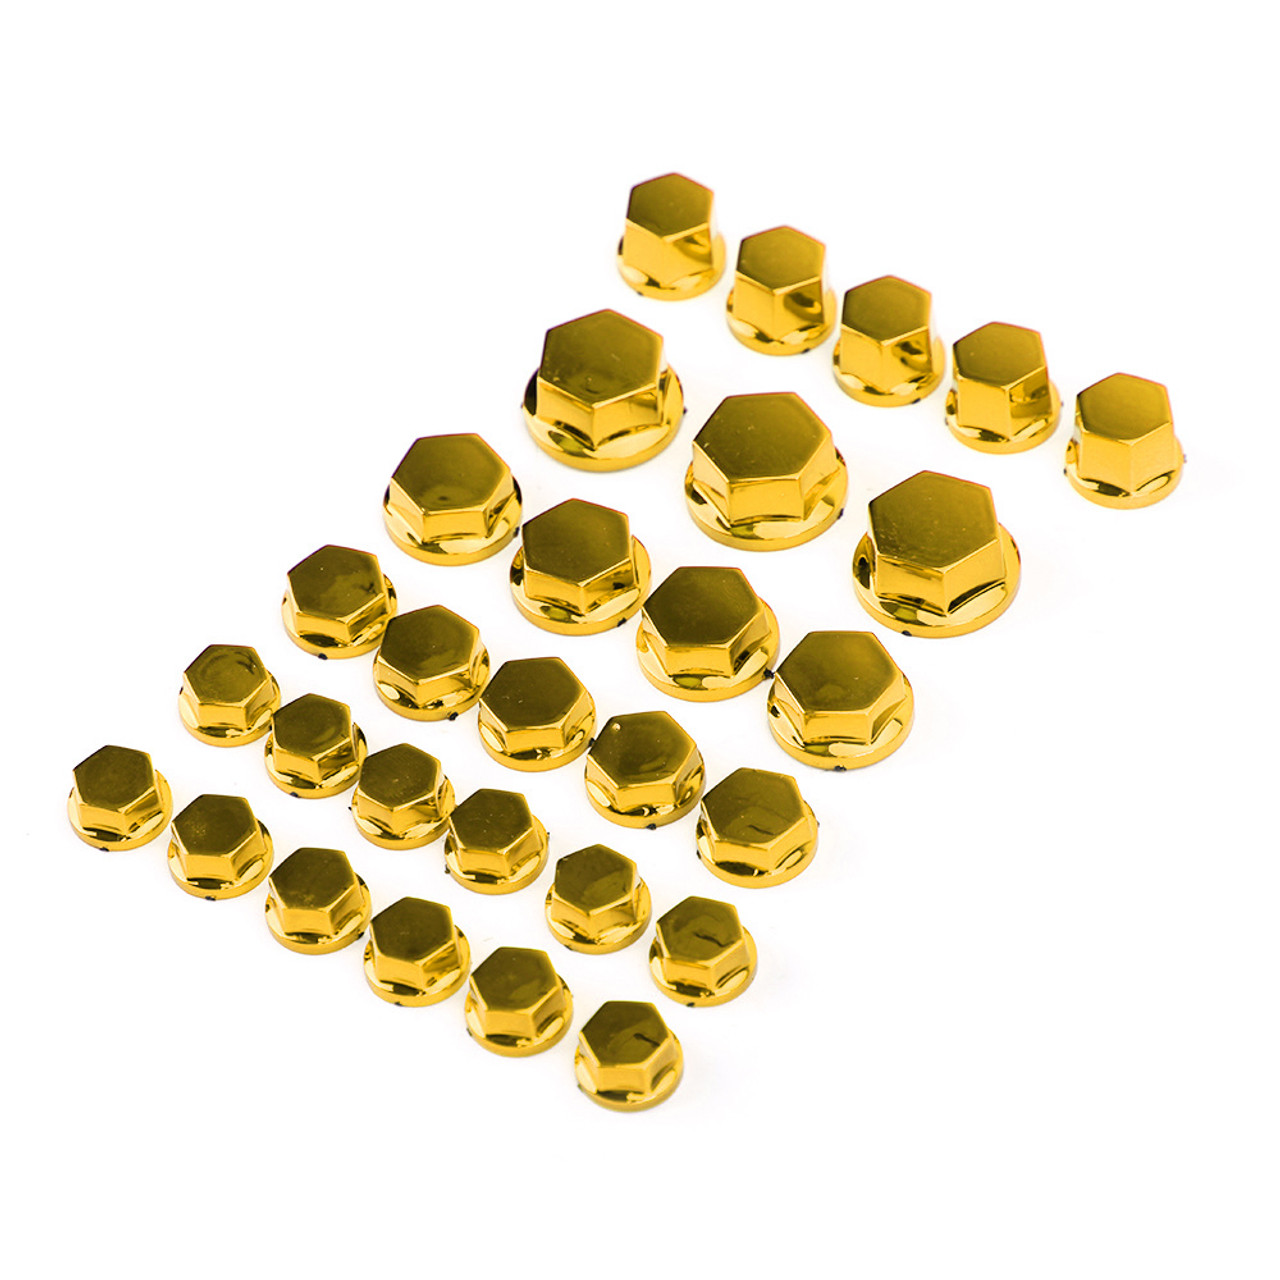 30pcs Motorcycle Hexagon Socket Screw Covers Bolt Nut Caps Fit for Yamaha Gold